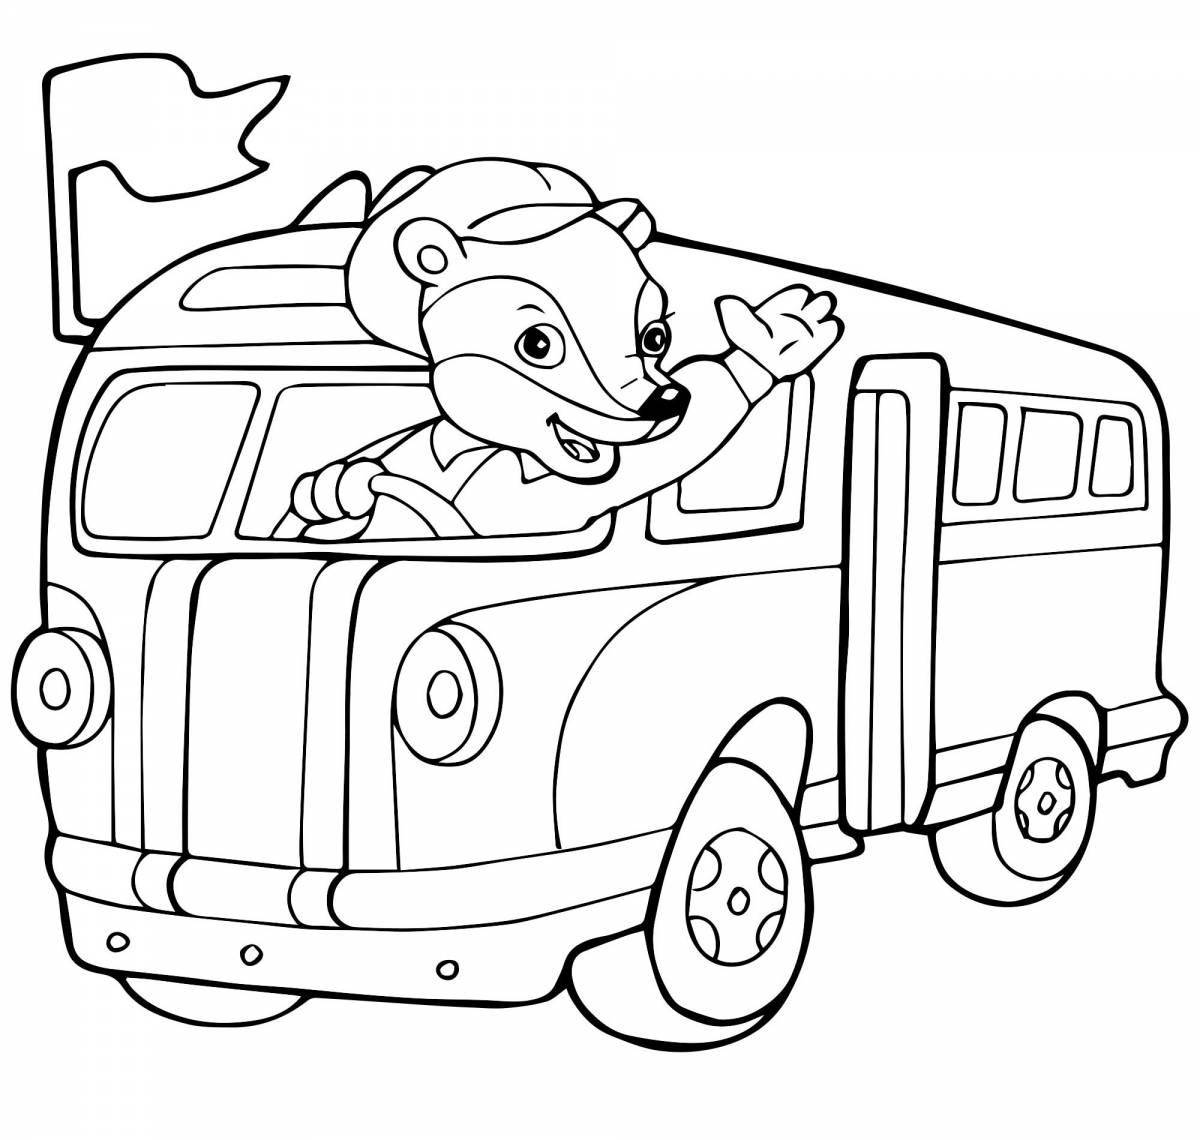 Coloring page funny colicter